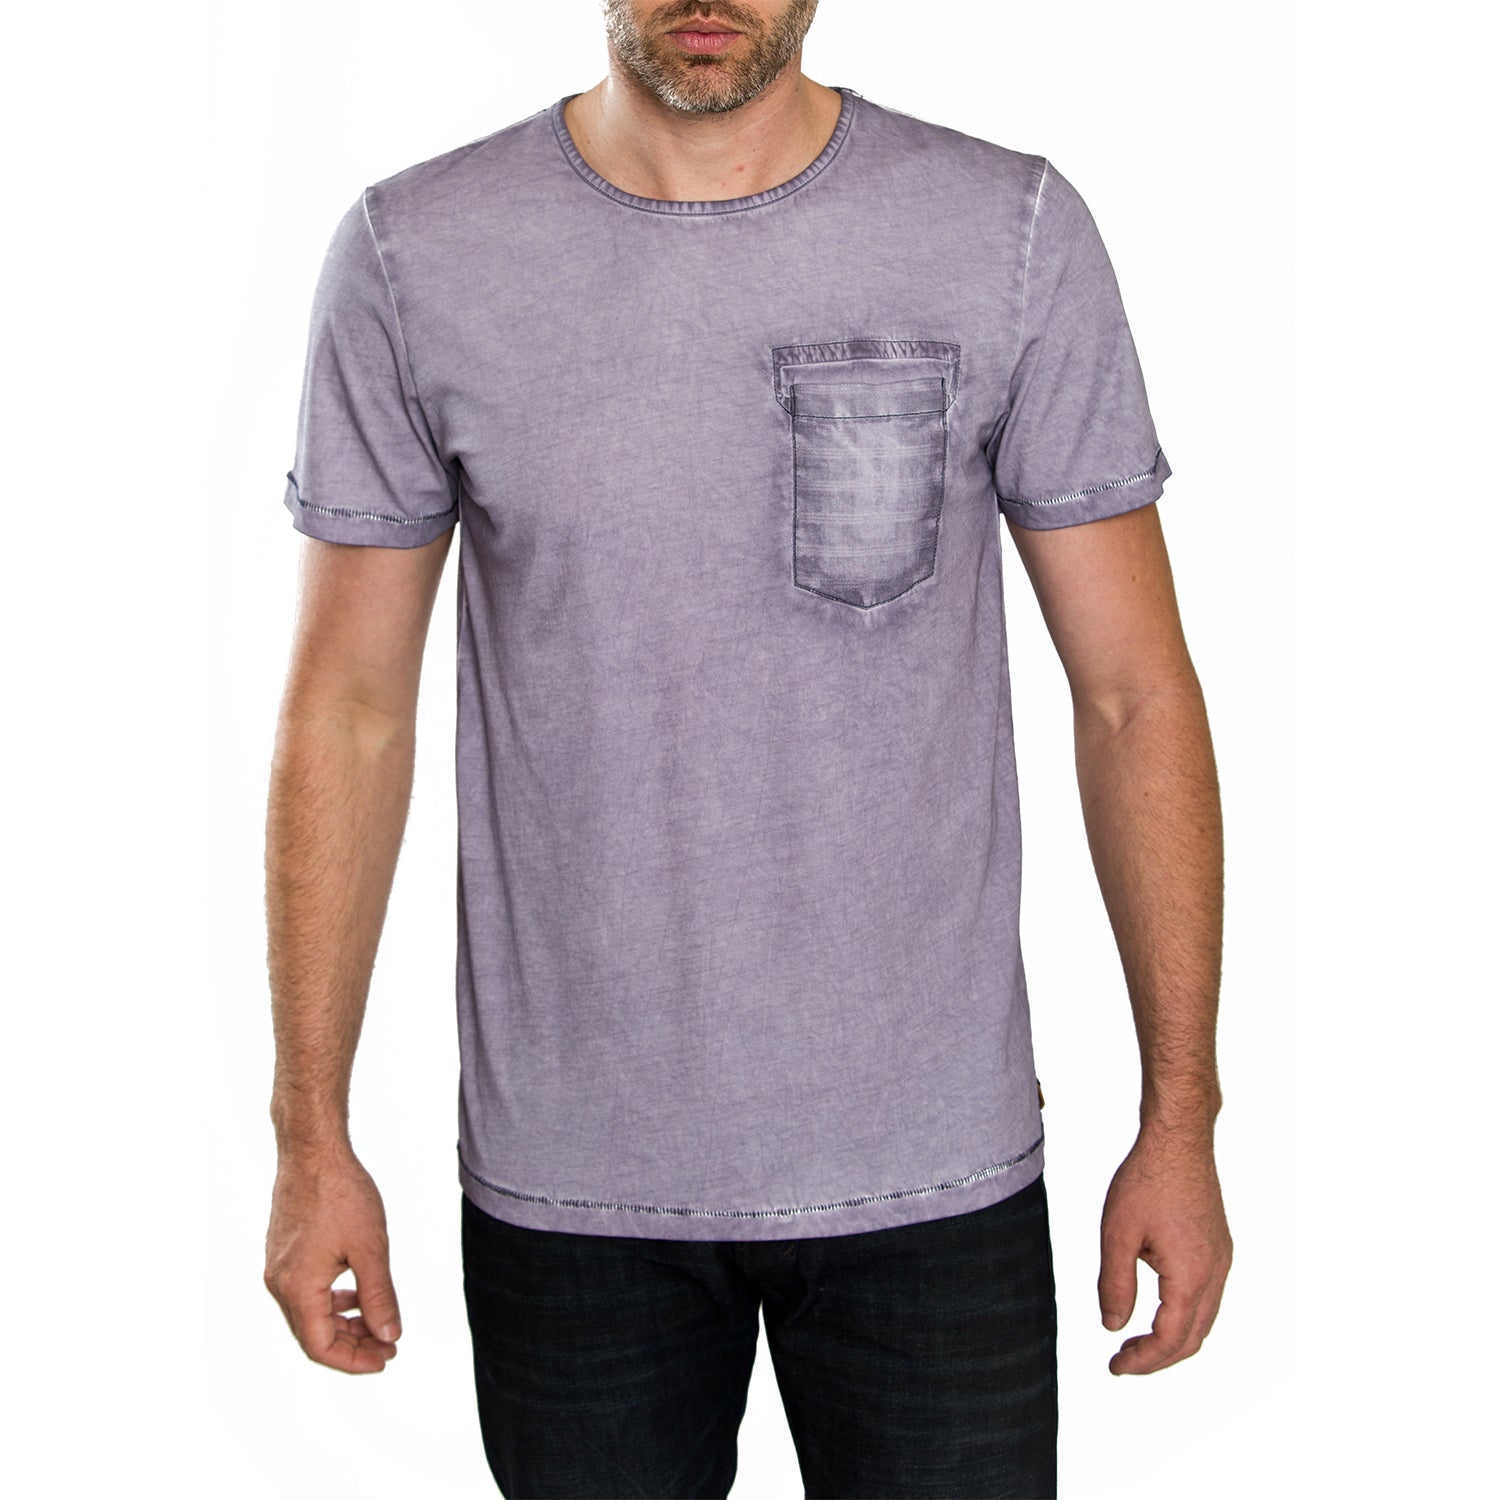 Enzyme Washed  Tee with Pocket